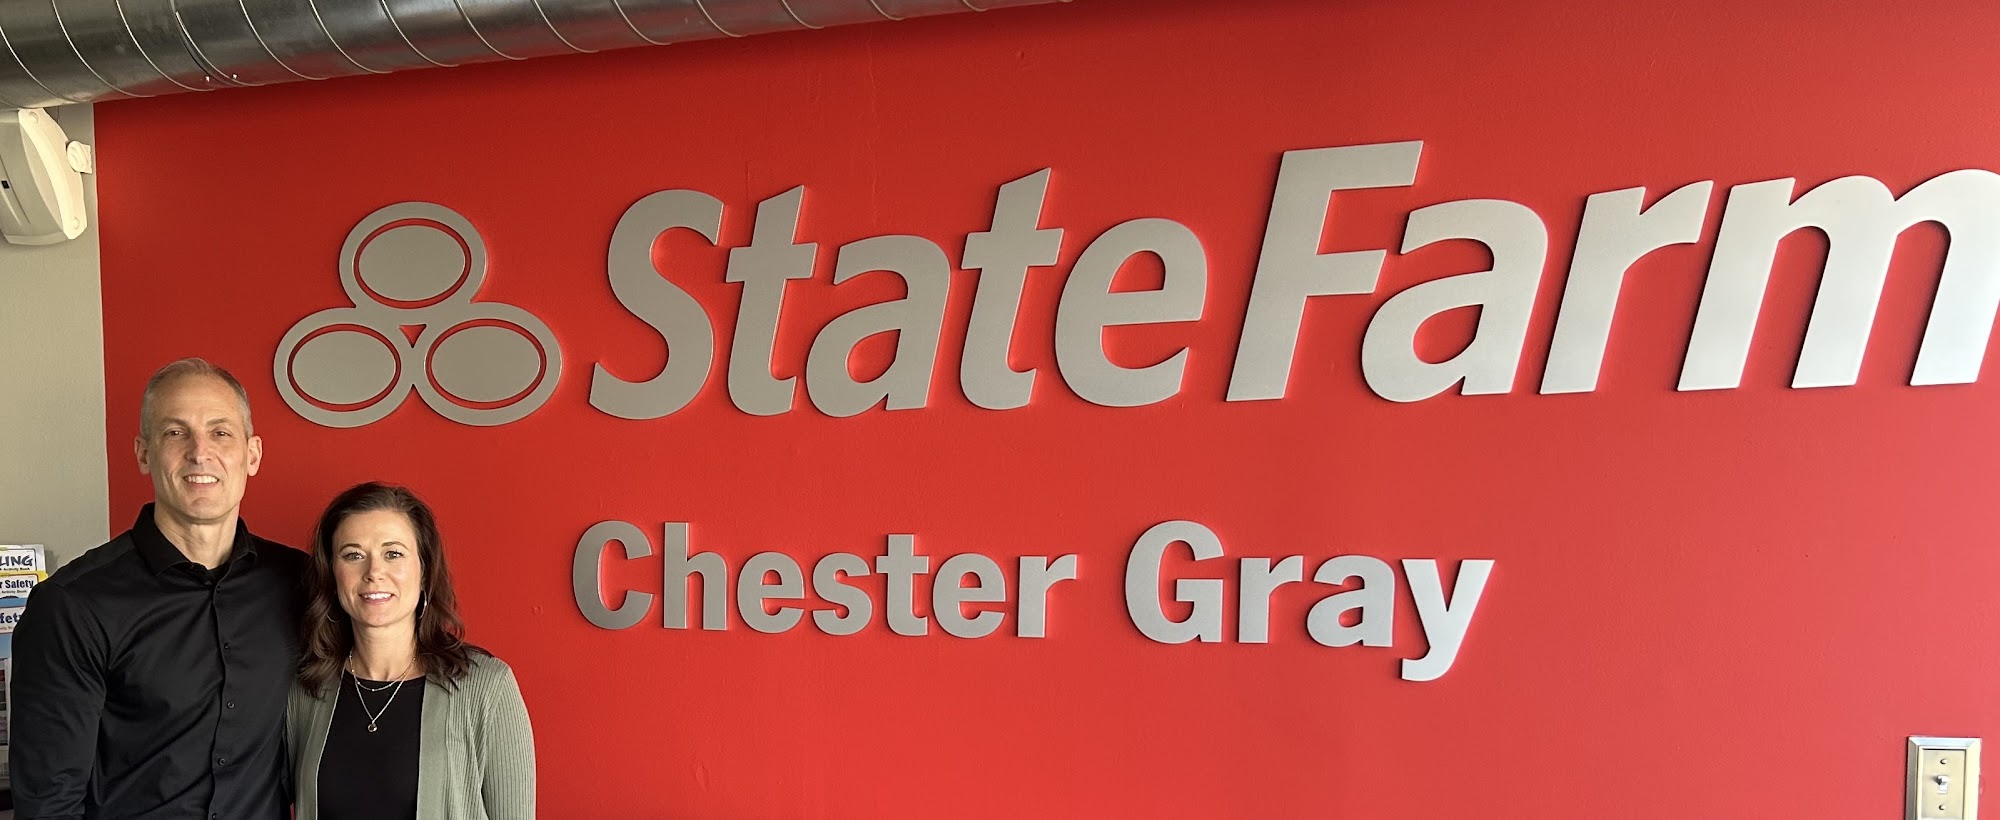 Chester Gray - State Farm Insurance Agent